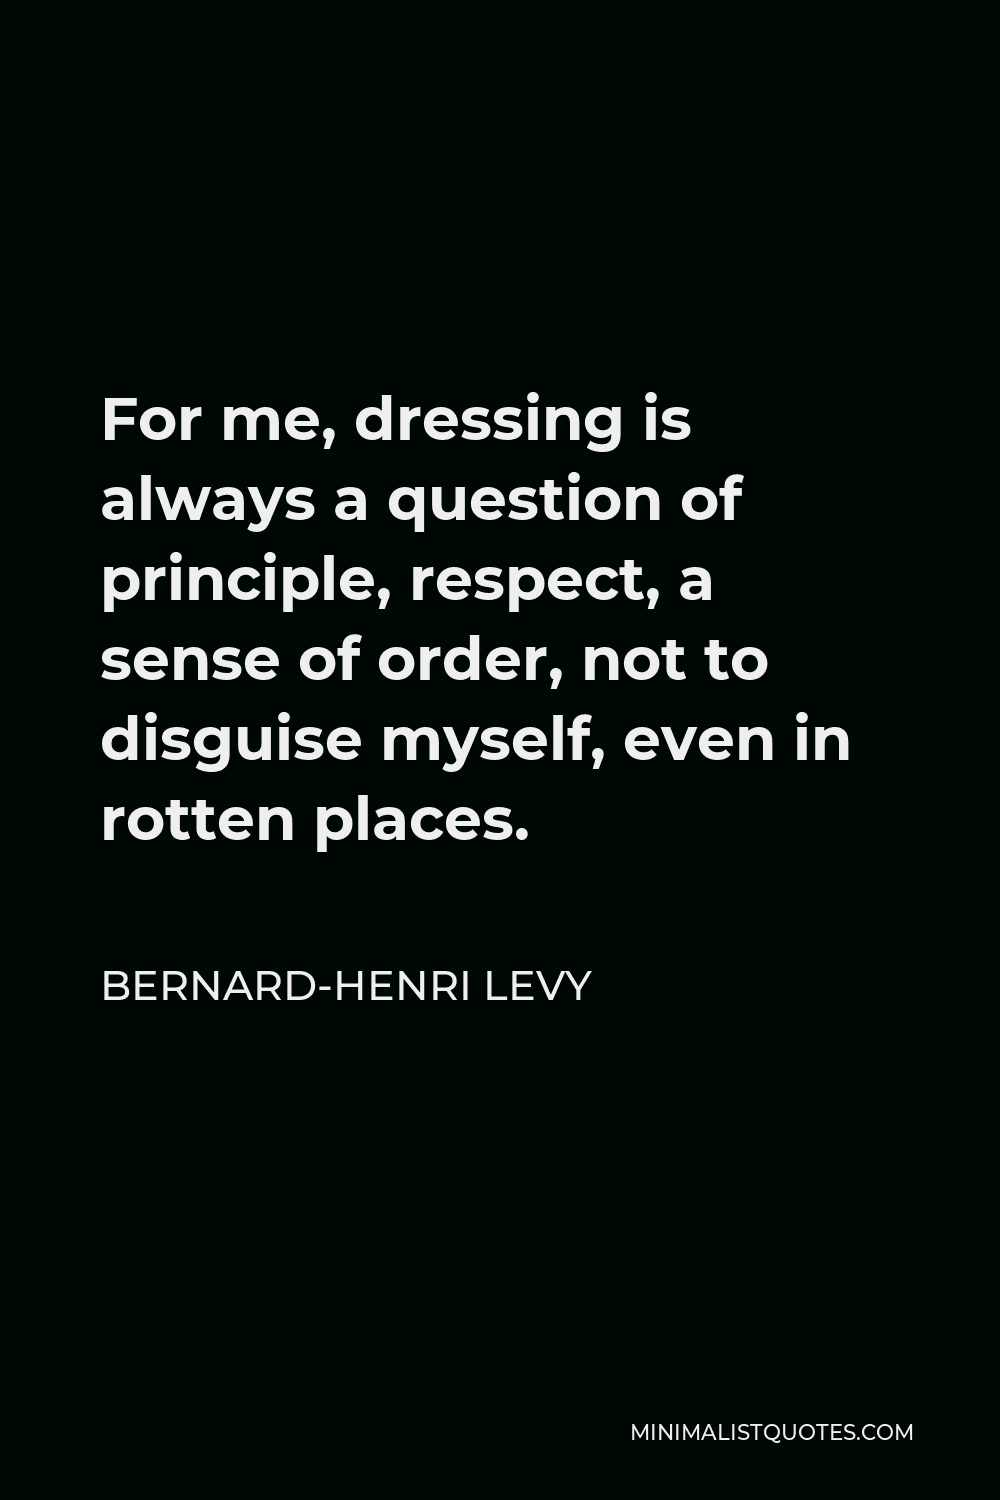 Bernard-Henri Levy Quote - For me, dressing is always a question of principle, respect, a sense of order, not to disguise myself, even in rotten places.